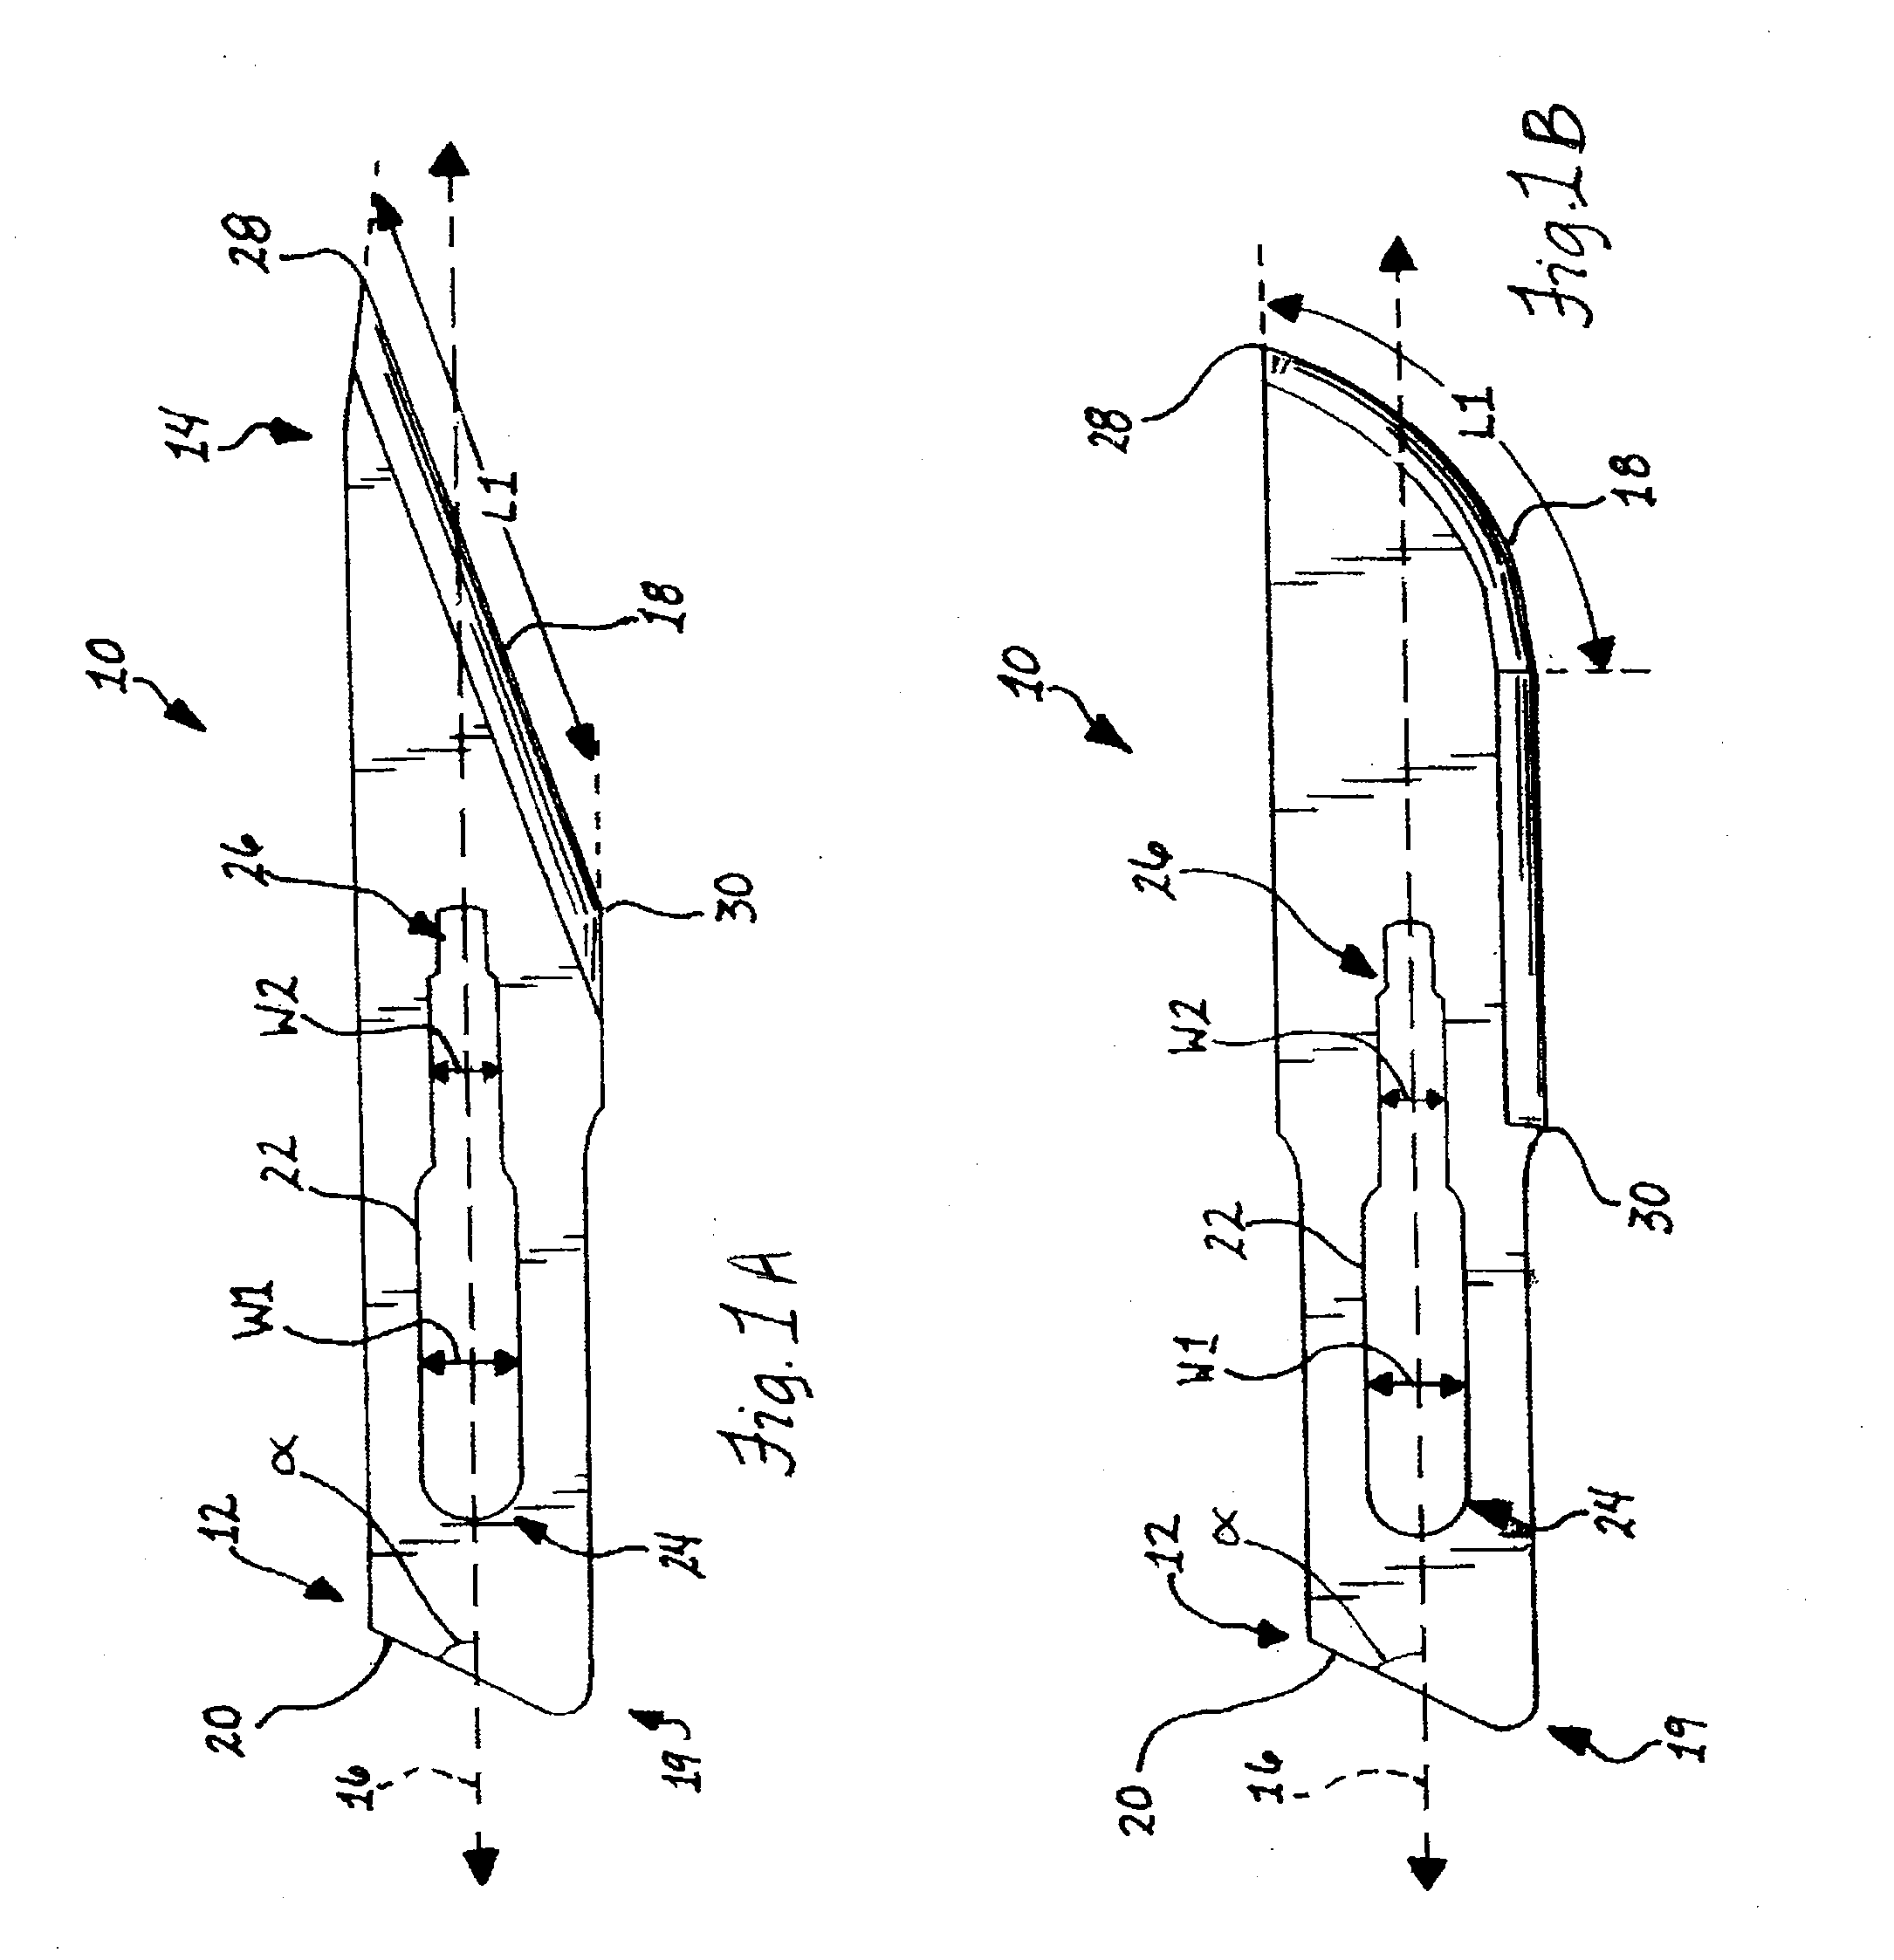 Annulus cutting tools and methods